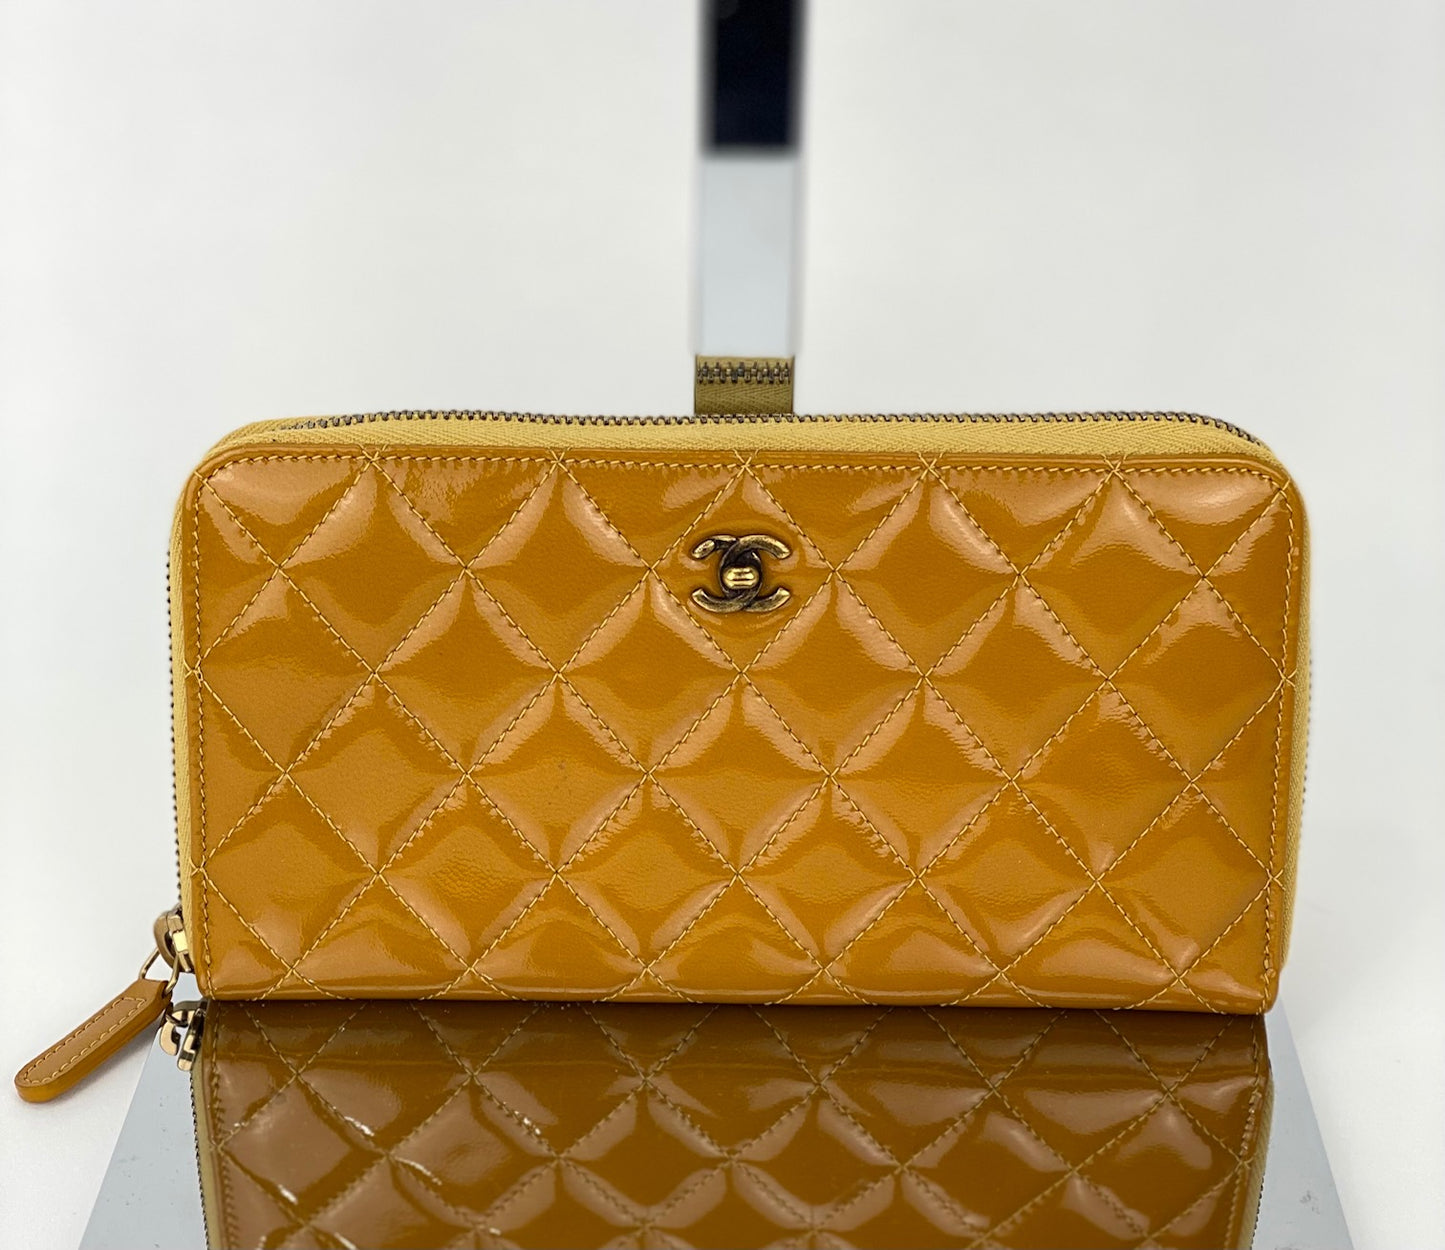 Chanel Yellow Brilliant Zip Around Clutch Preowned